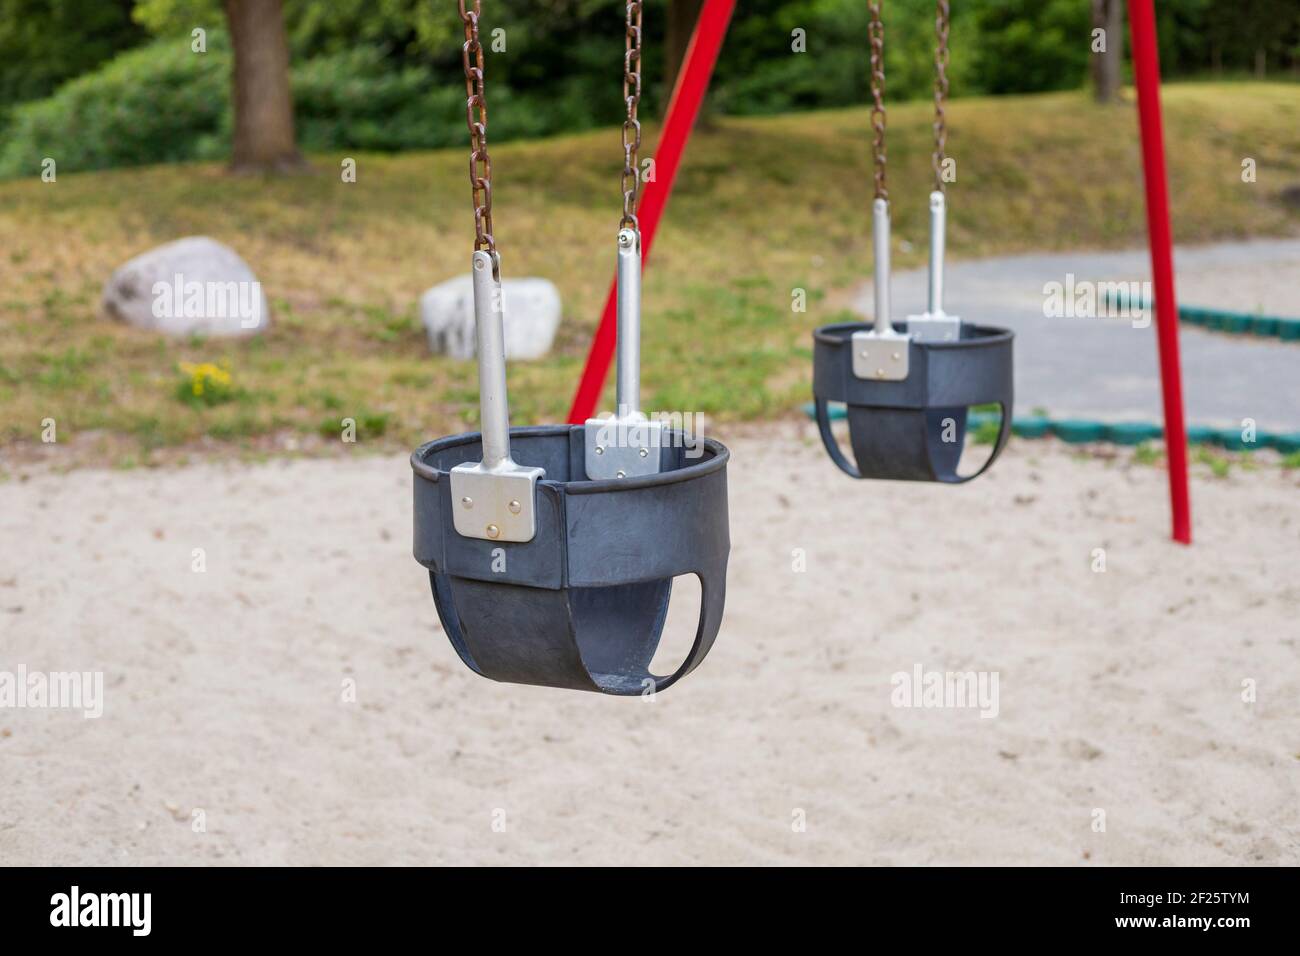 Swings in the park at playground on a summer day without people Stock Photo